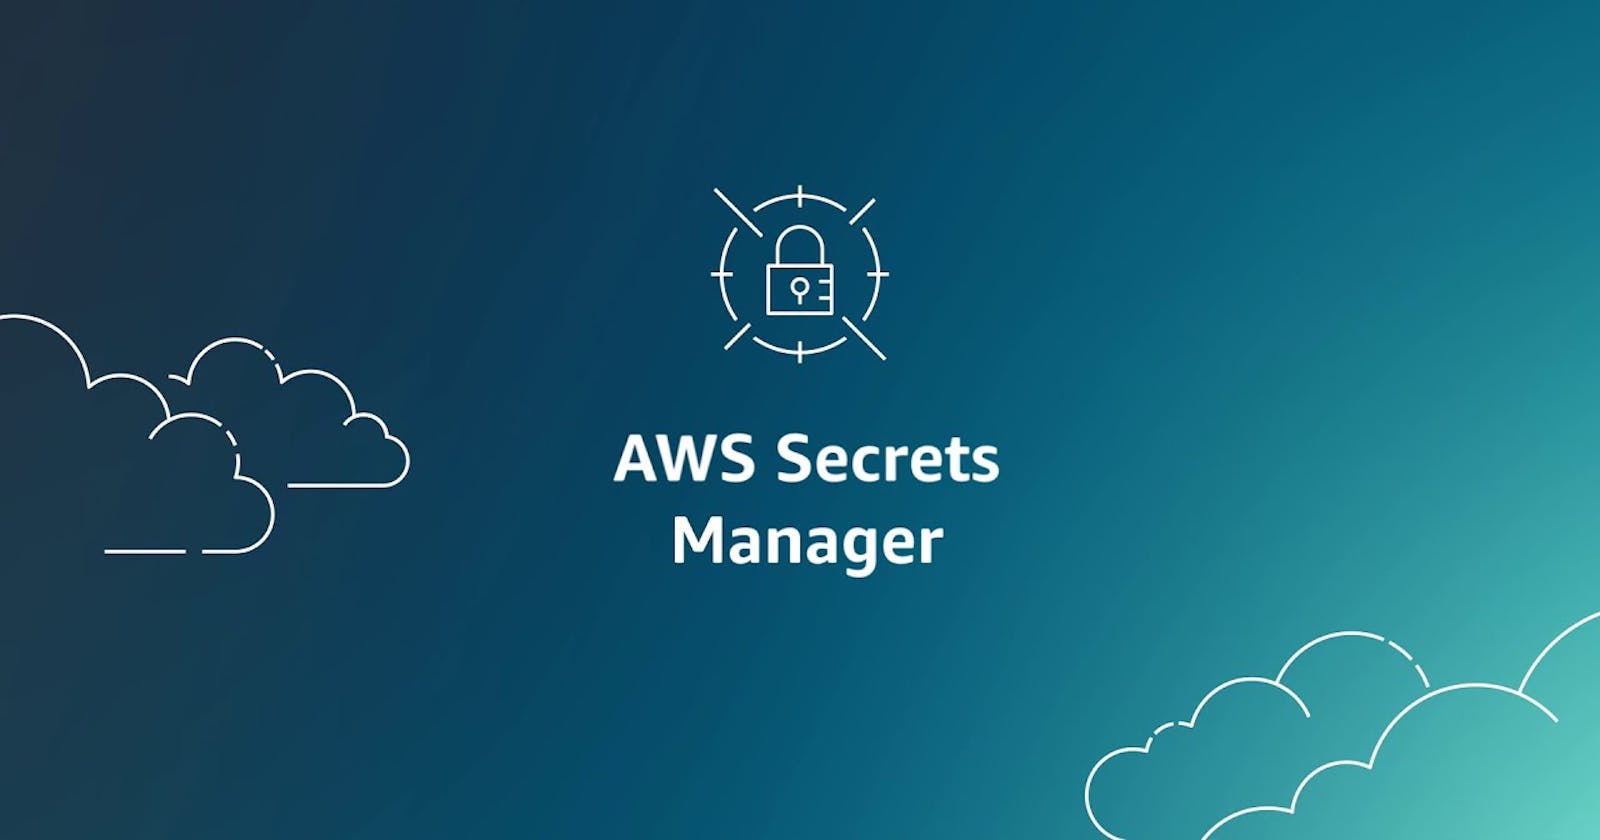 Securing and Rotating Secrets Easily with AWS Secrets Manager (Part 2 of 2)